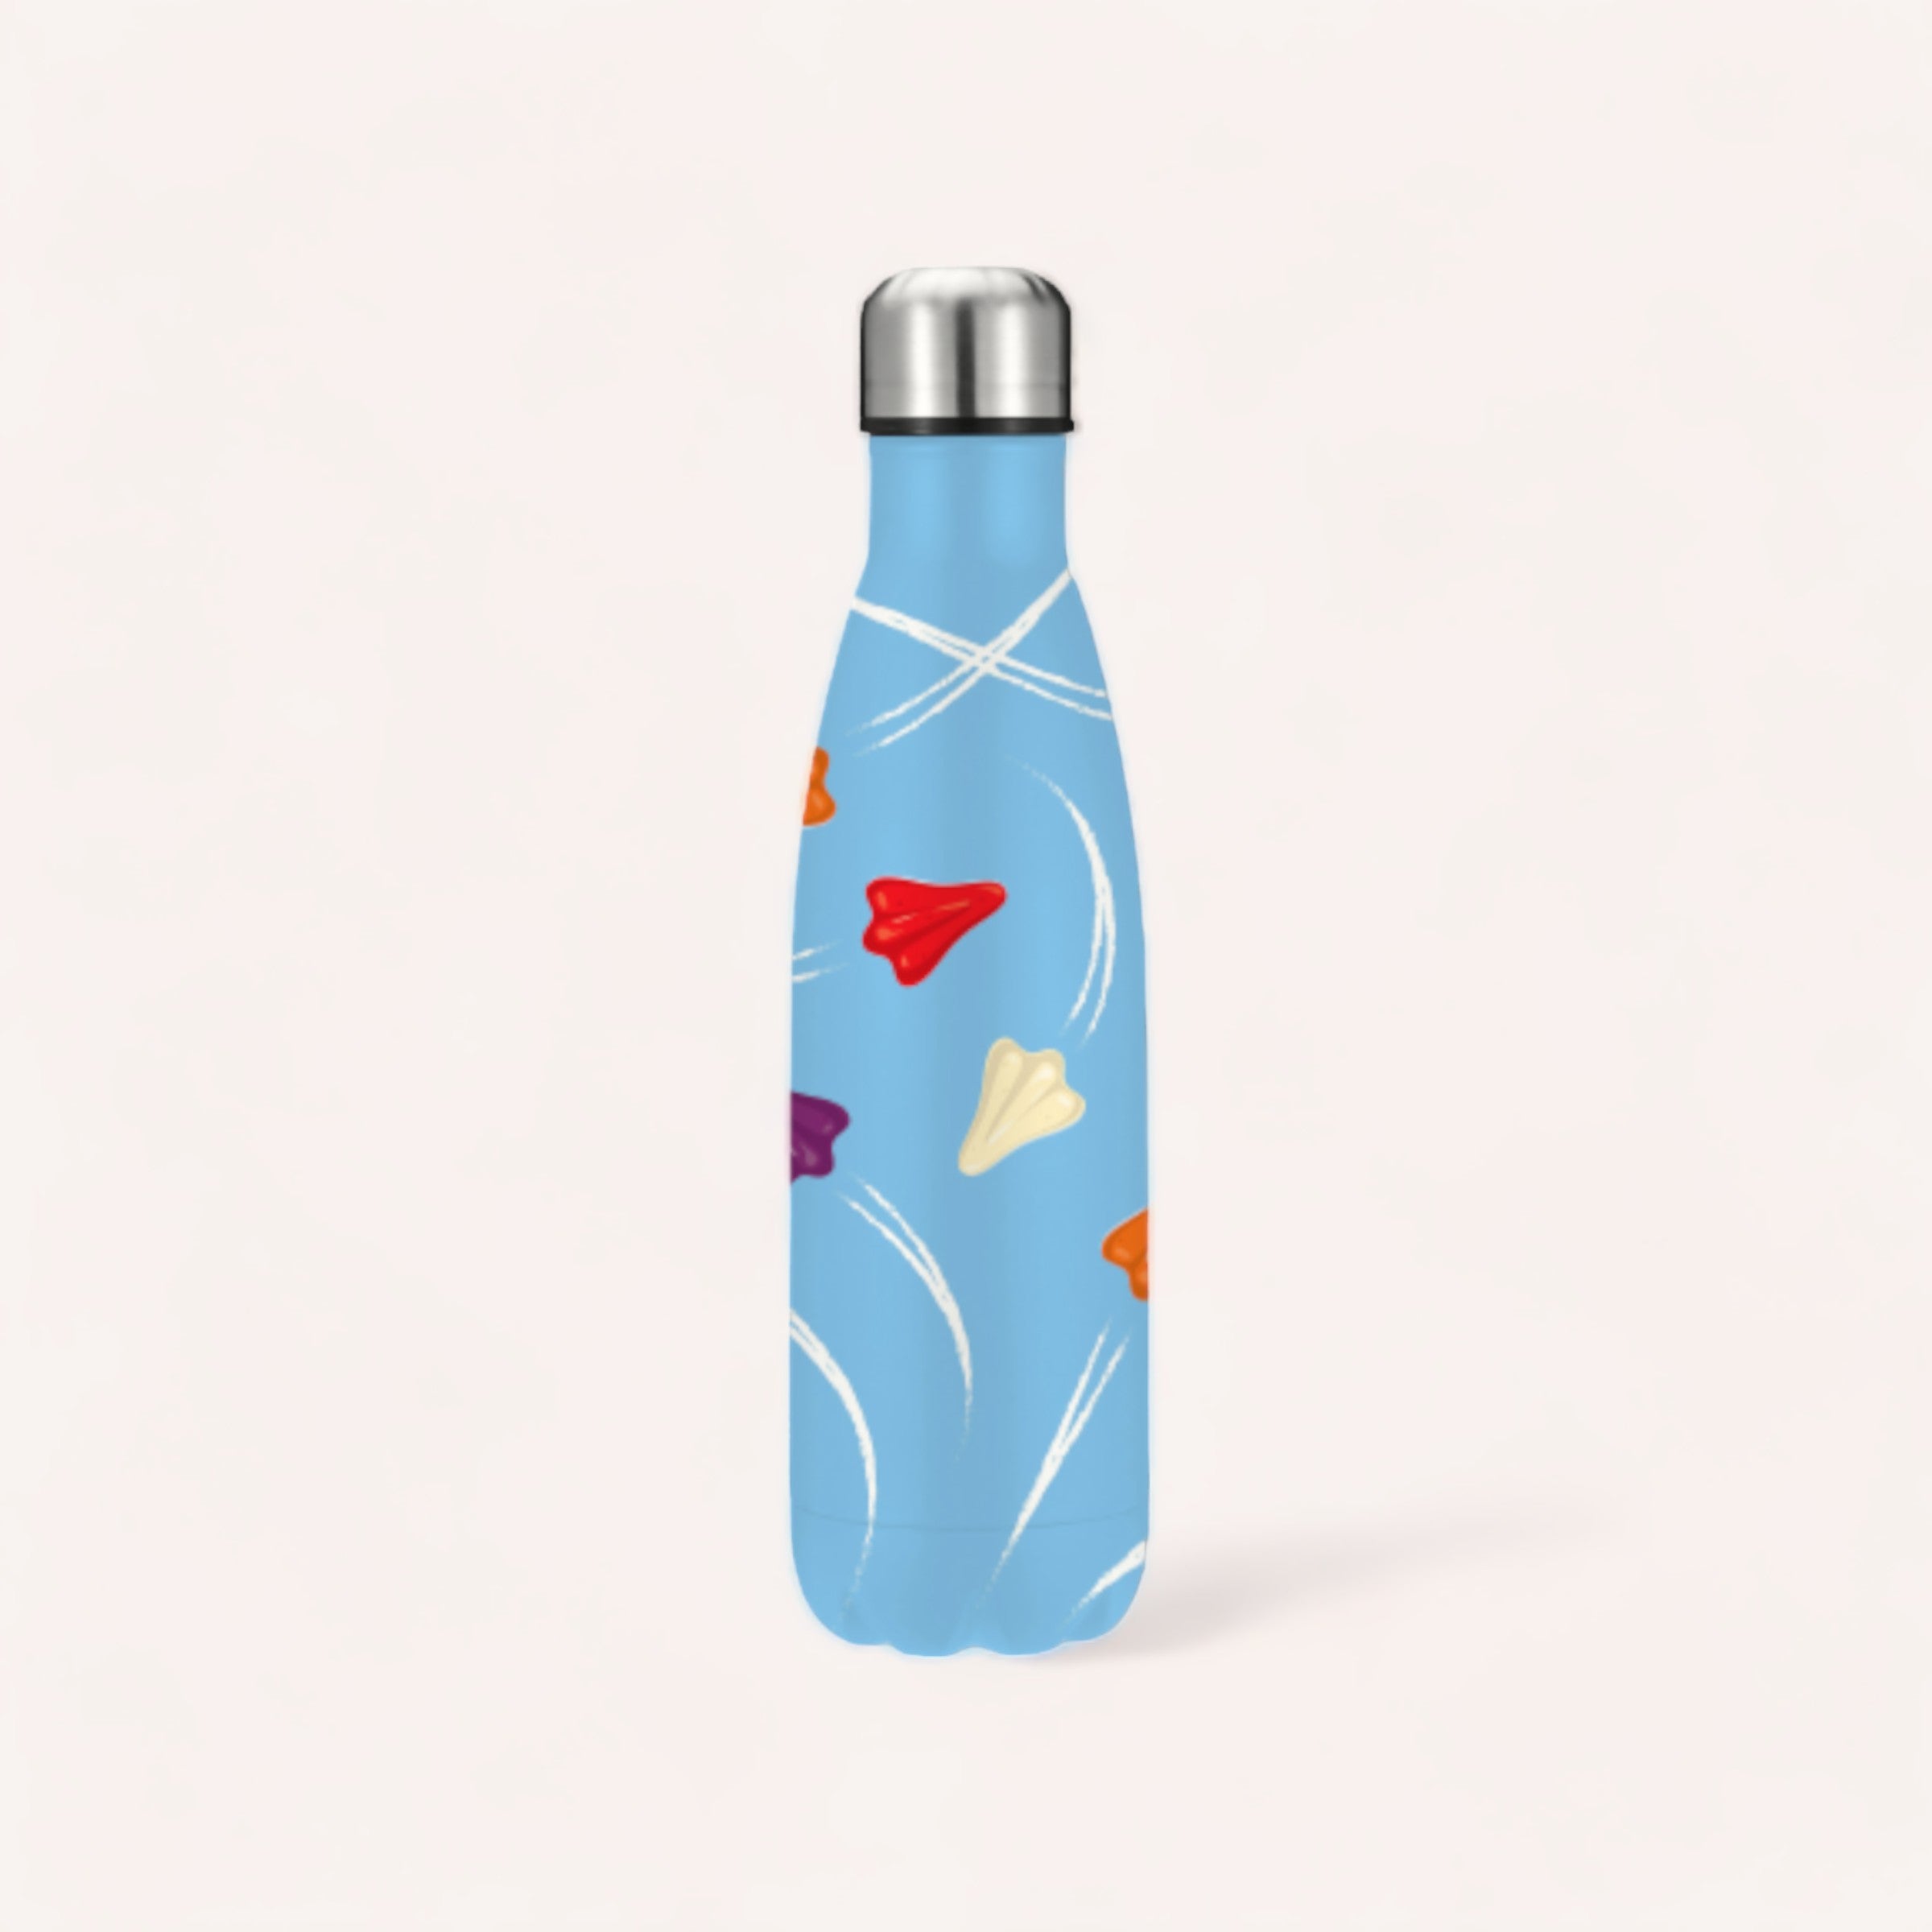 A colorful insulated Jet Planes stainless steel water bottle with a blue background and playful fish design on a white surface by Glenn Jones Accessories.